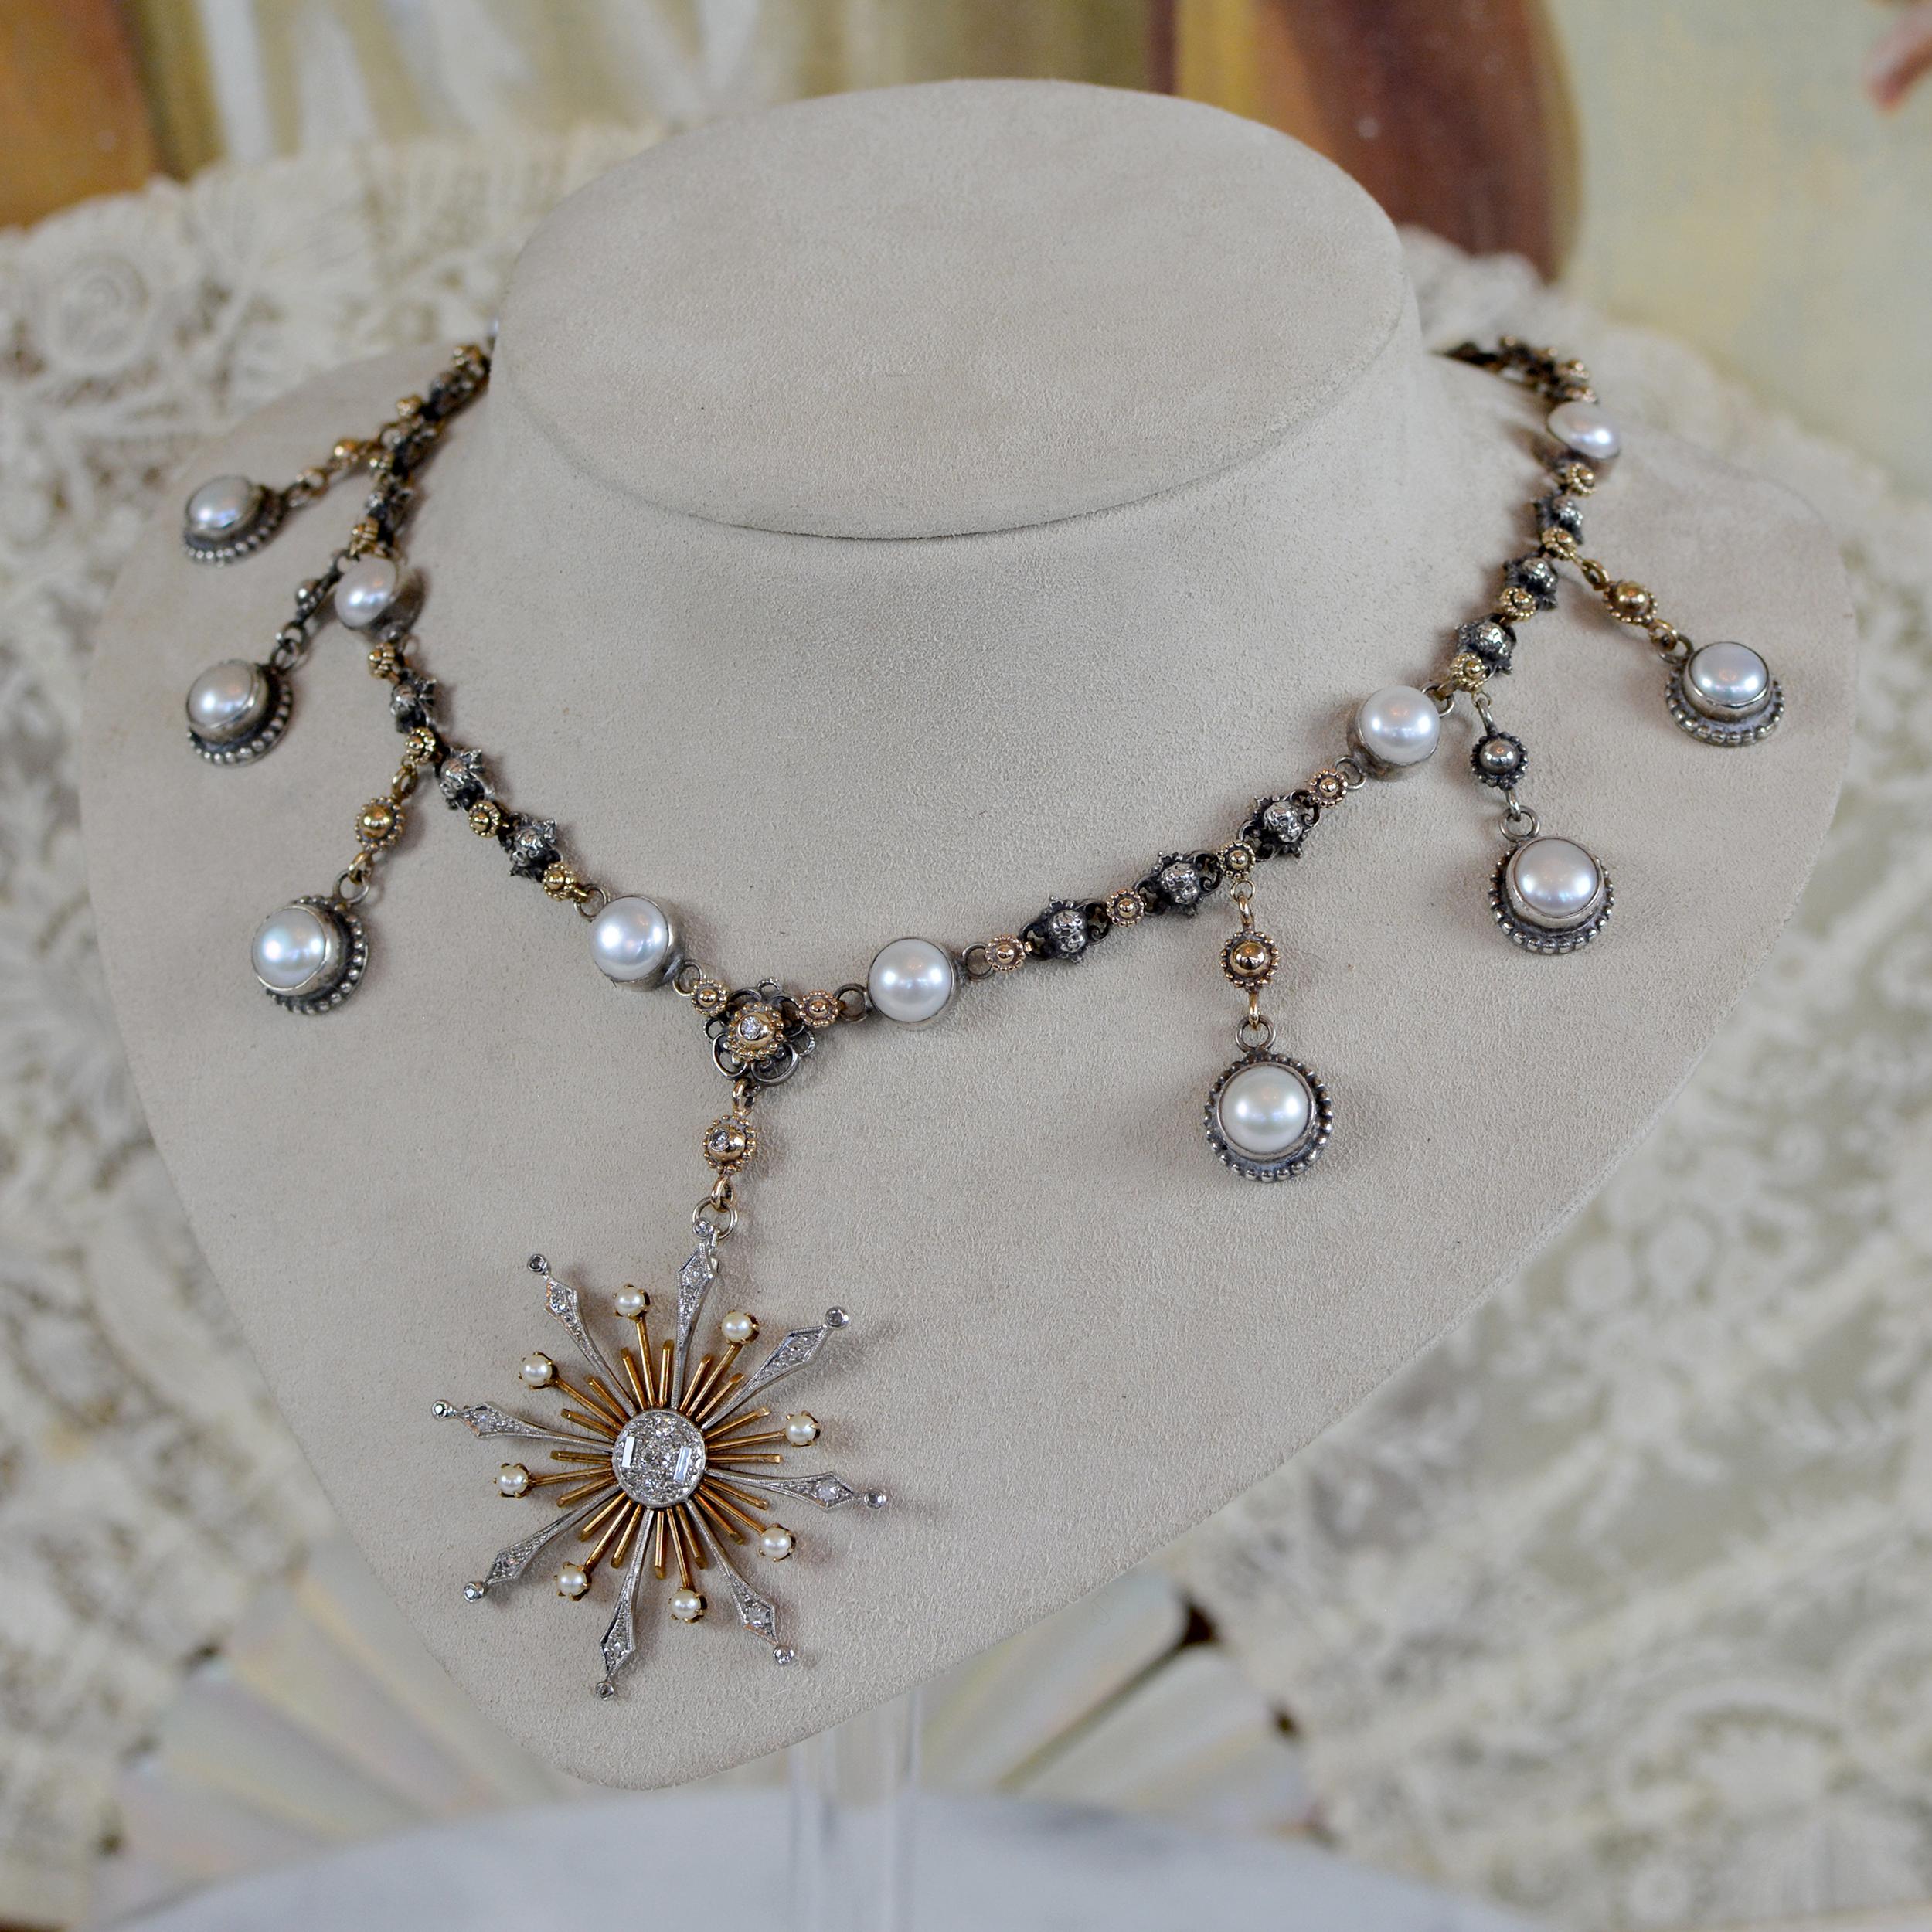 Jill Garber Diamond and Pearl Starburst Drop Necklace - 14 kt. Gold and Silver In New Condition For Sale In Saginaw, MI